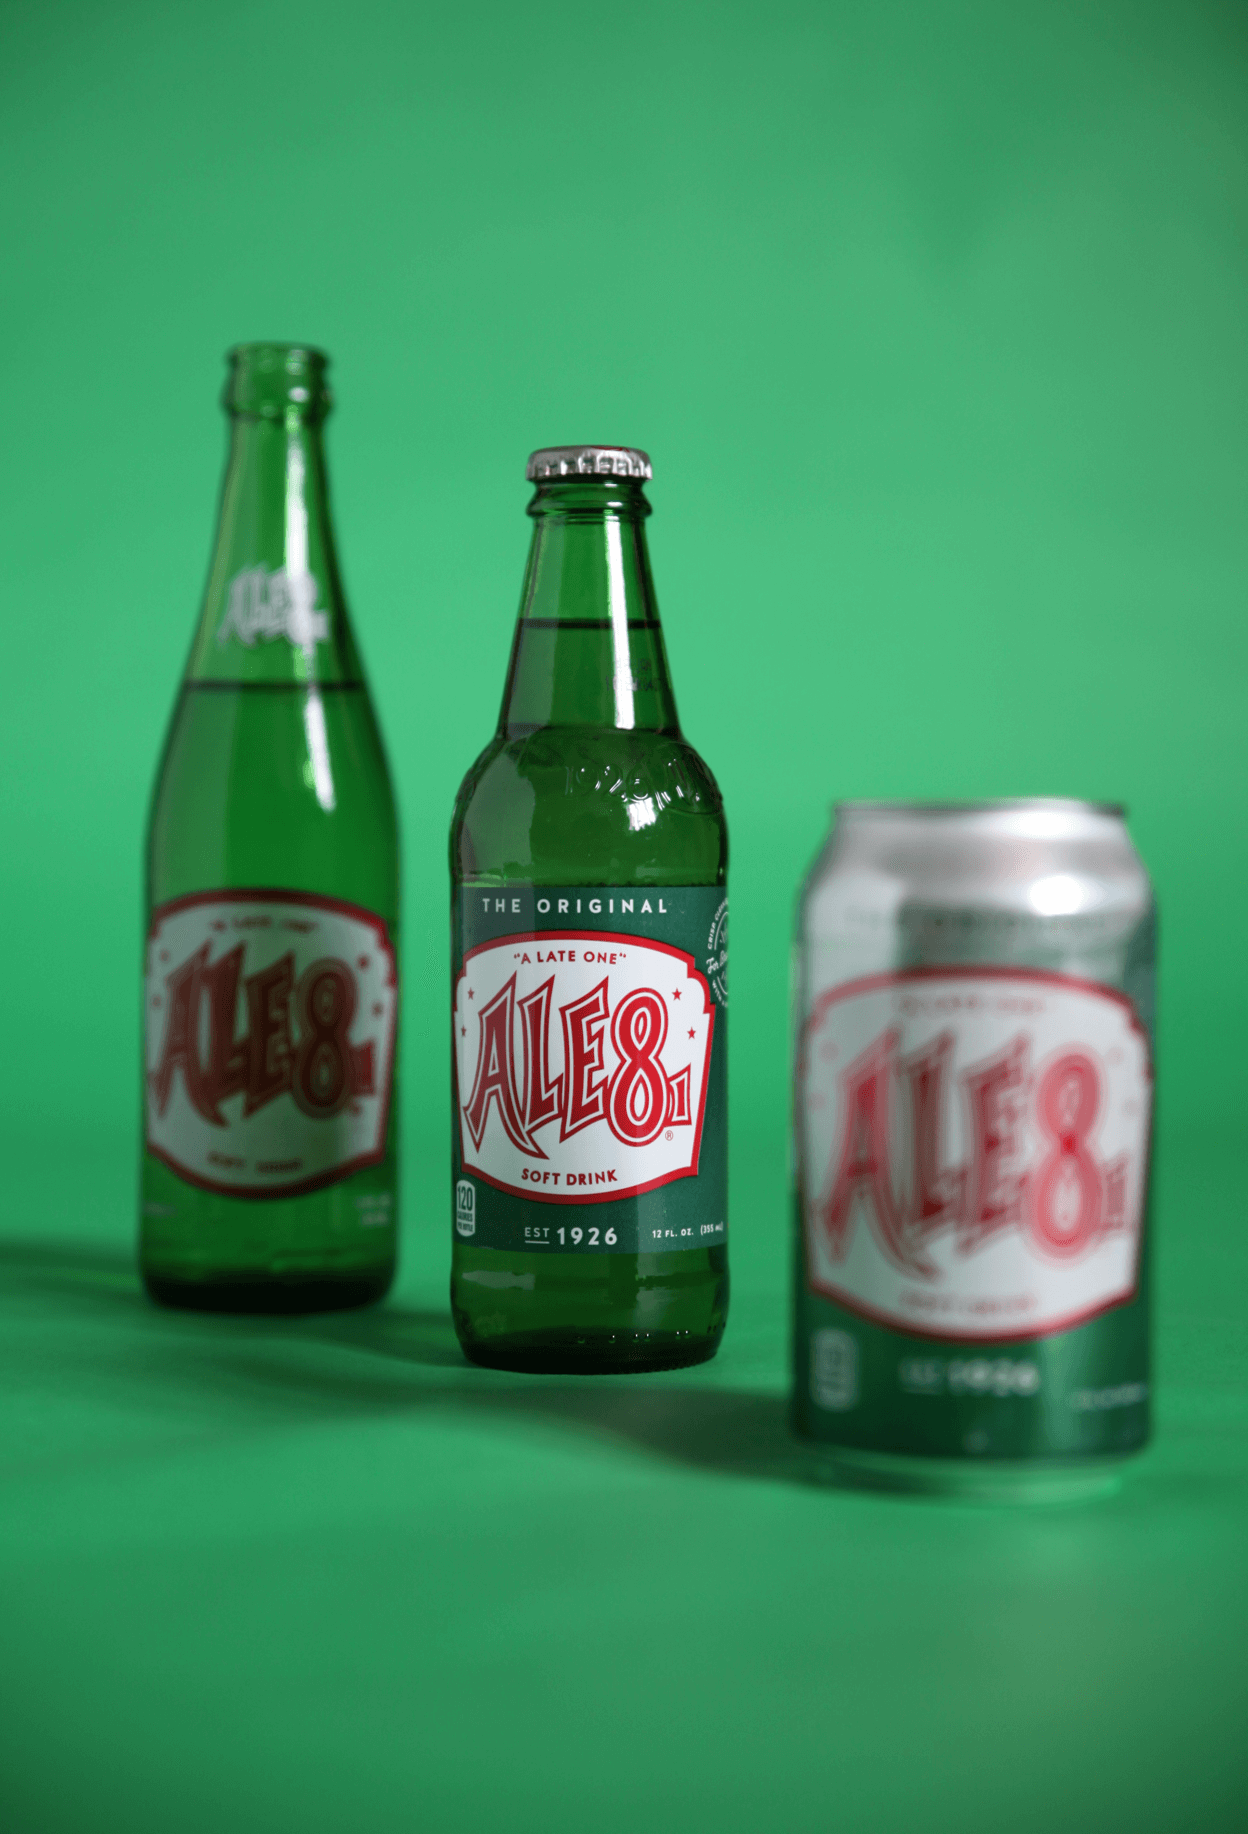 Ale-8 cans and bottles